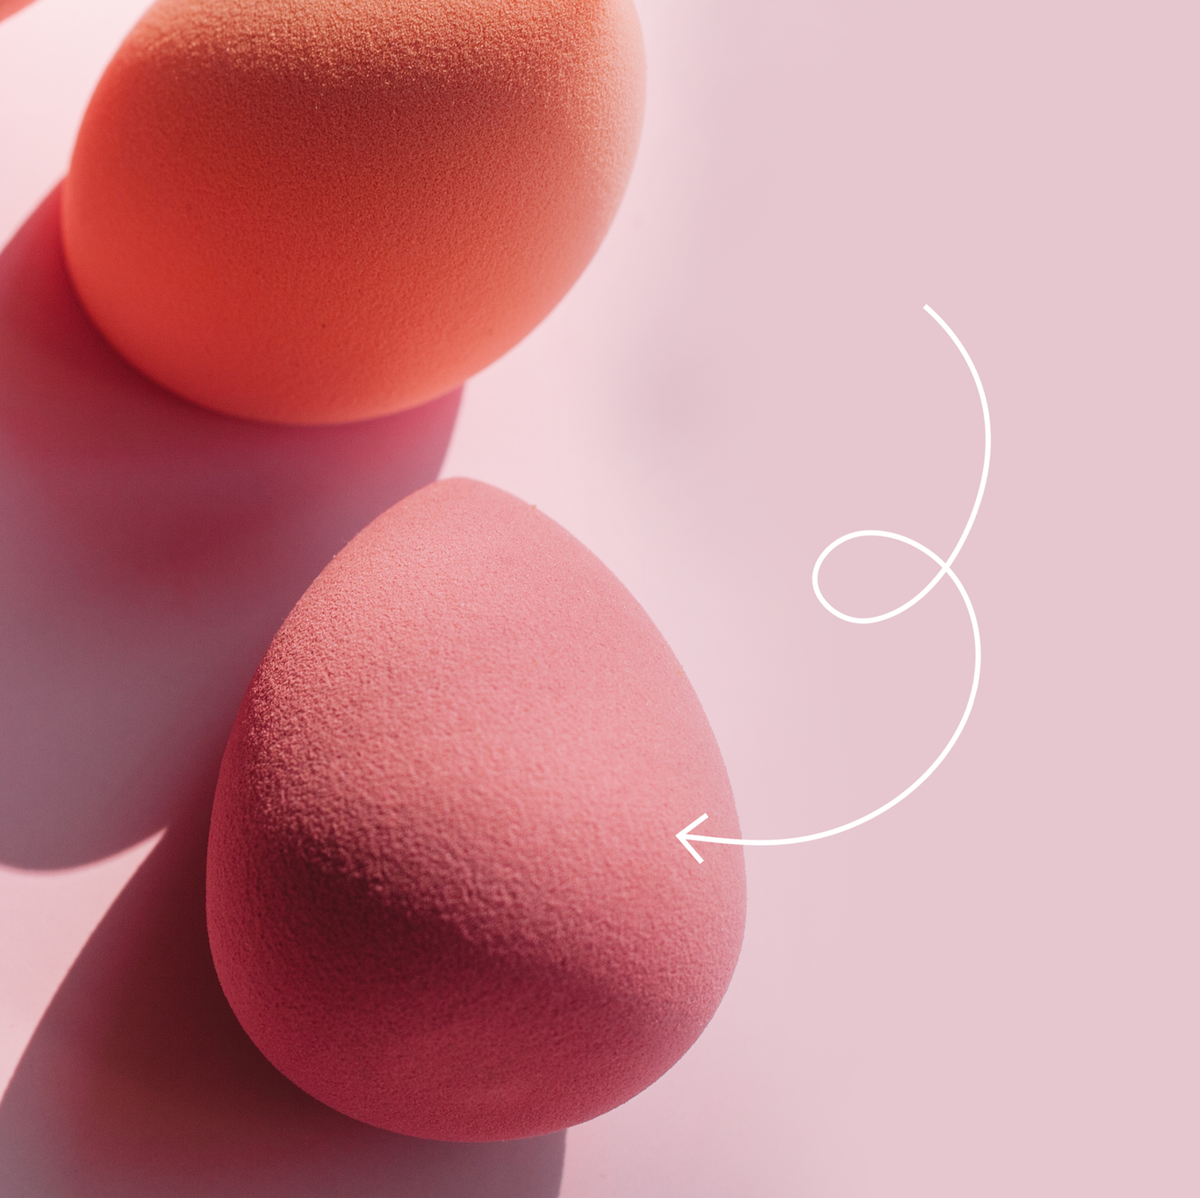 How to Clean a Silicone Makeup Sponge